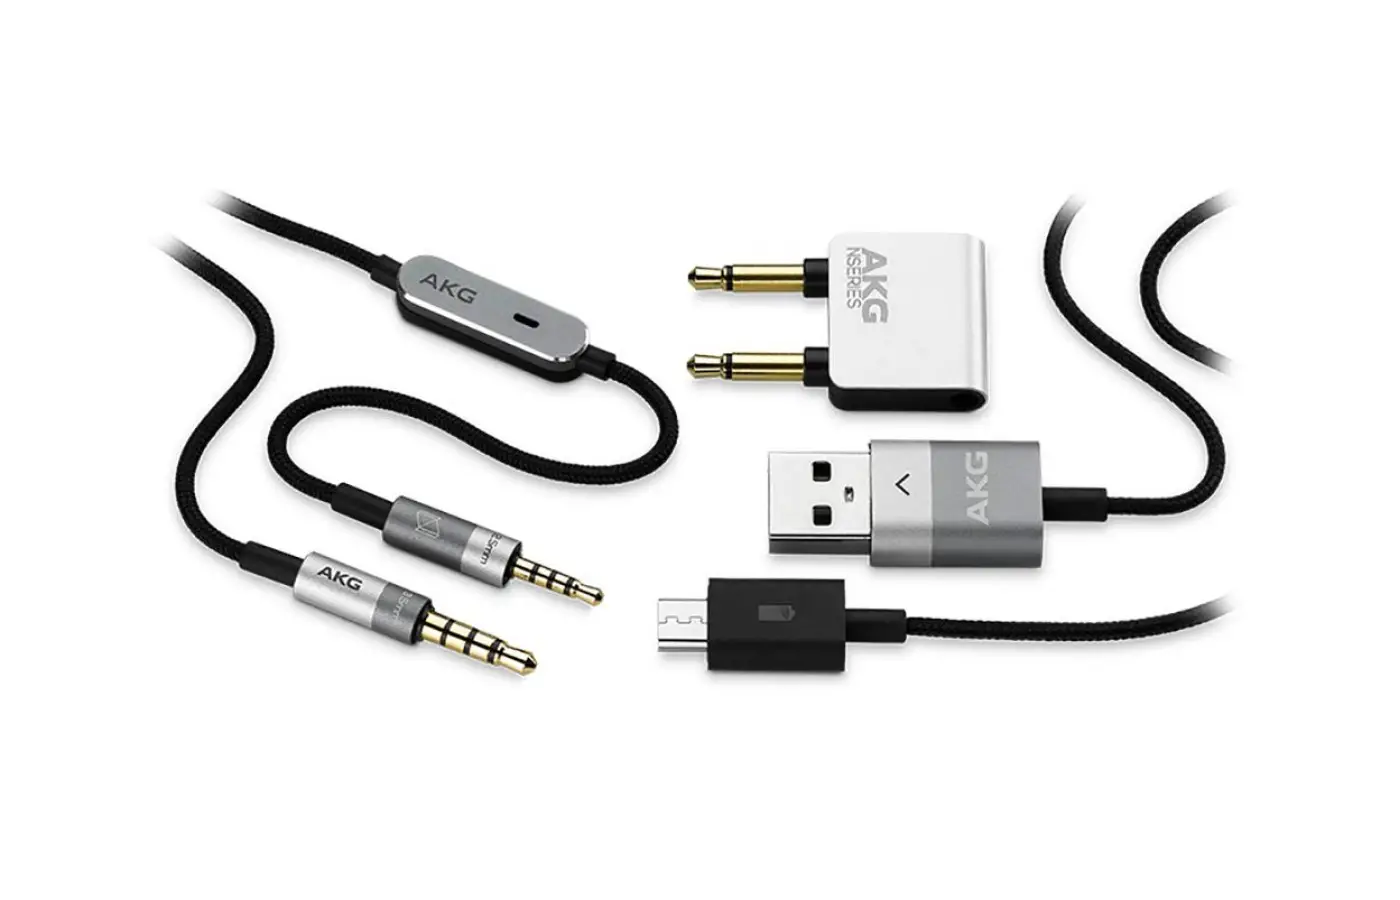 Accessories include charging cable, flight adapter, and one-button remote detachable cable. 